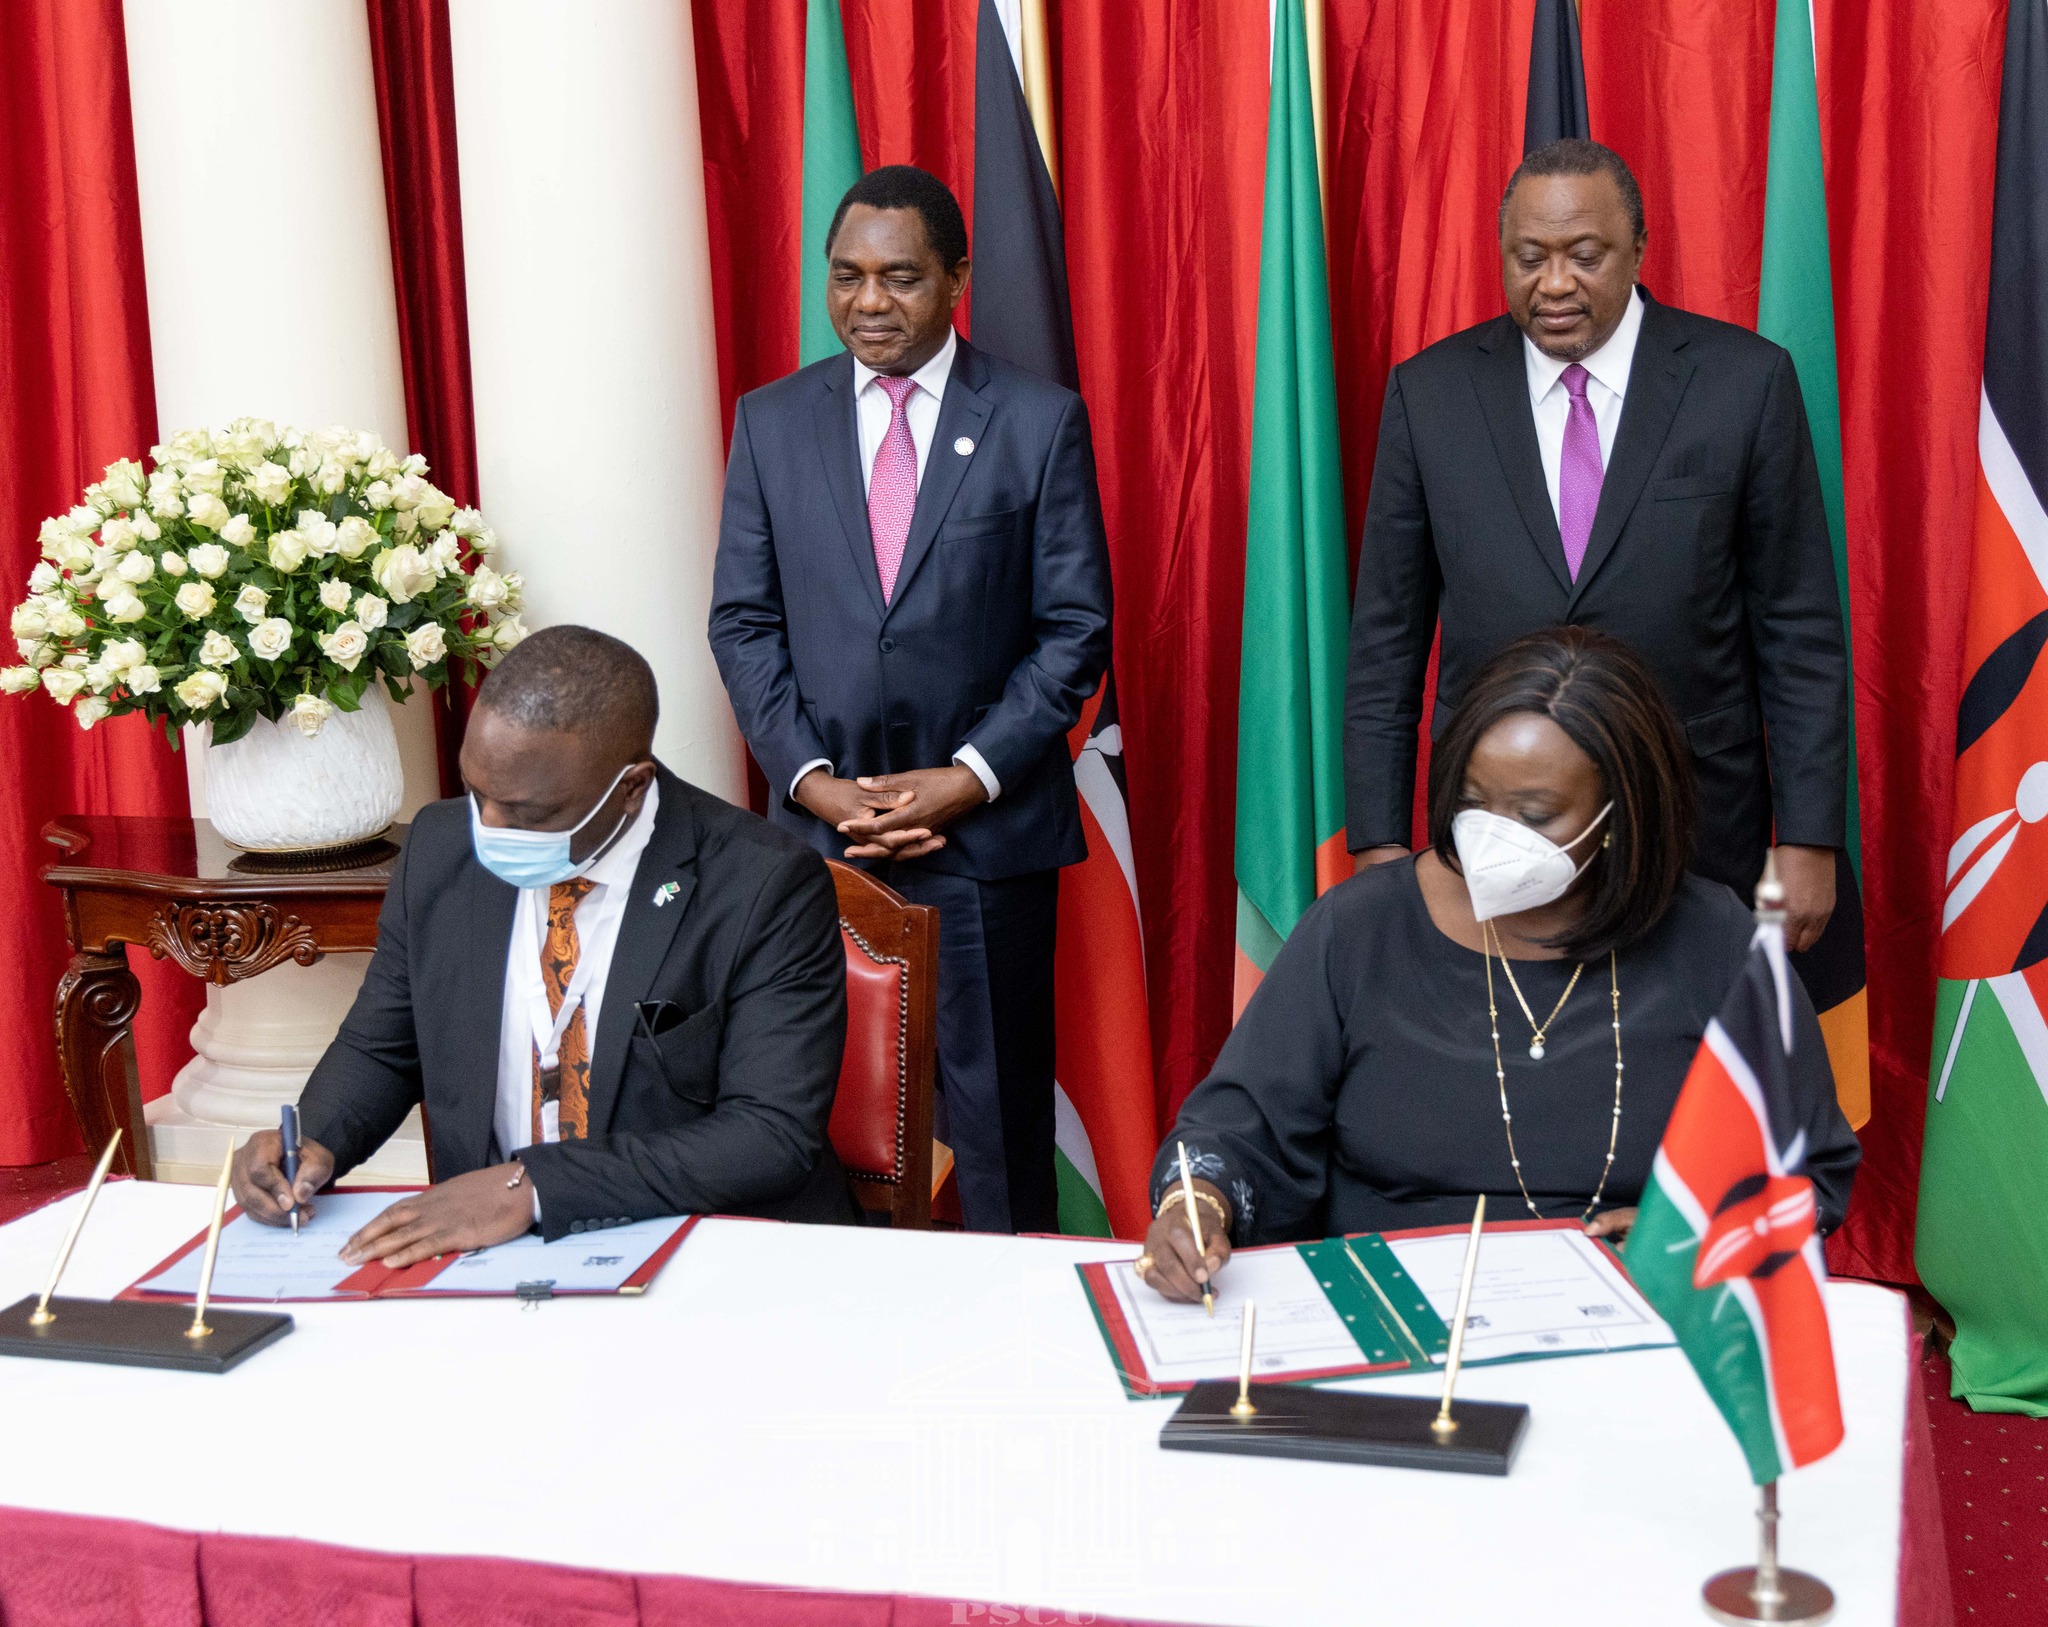 Kenya, Zambia to remove barriers hindering trade